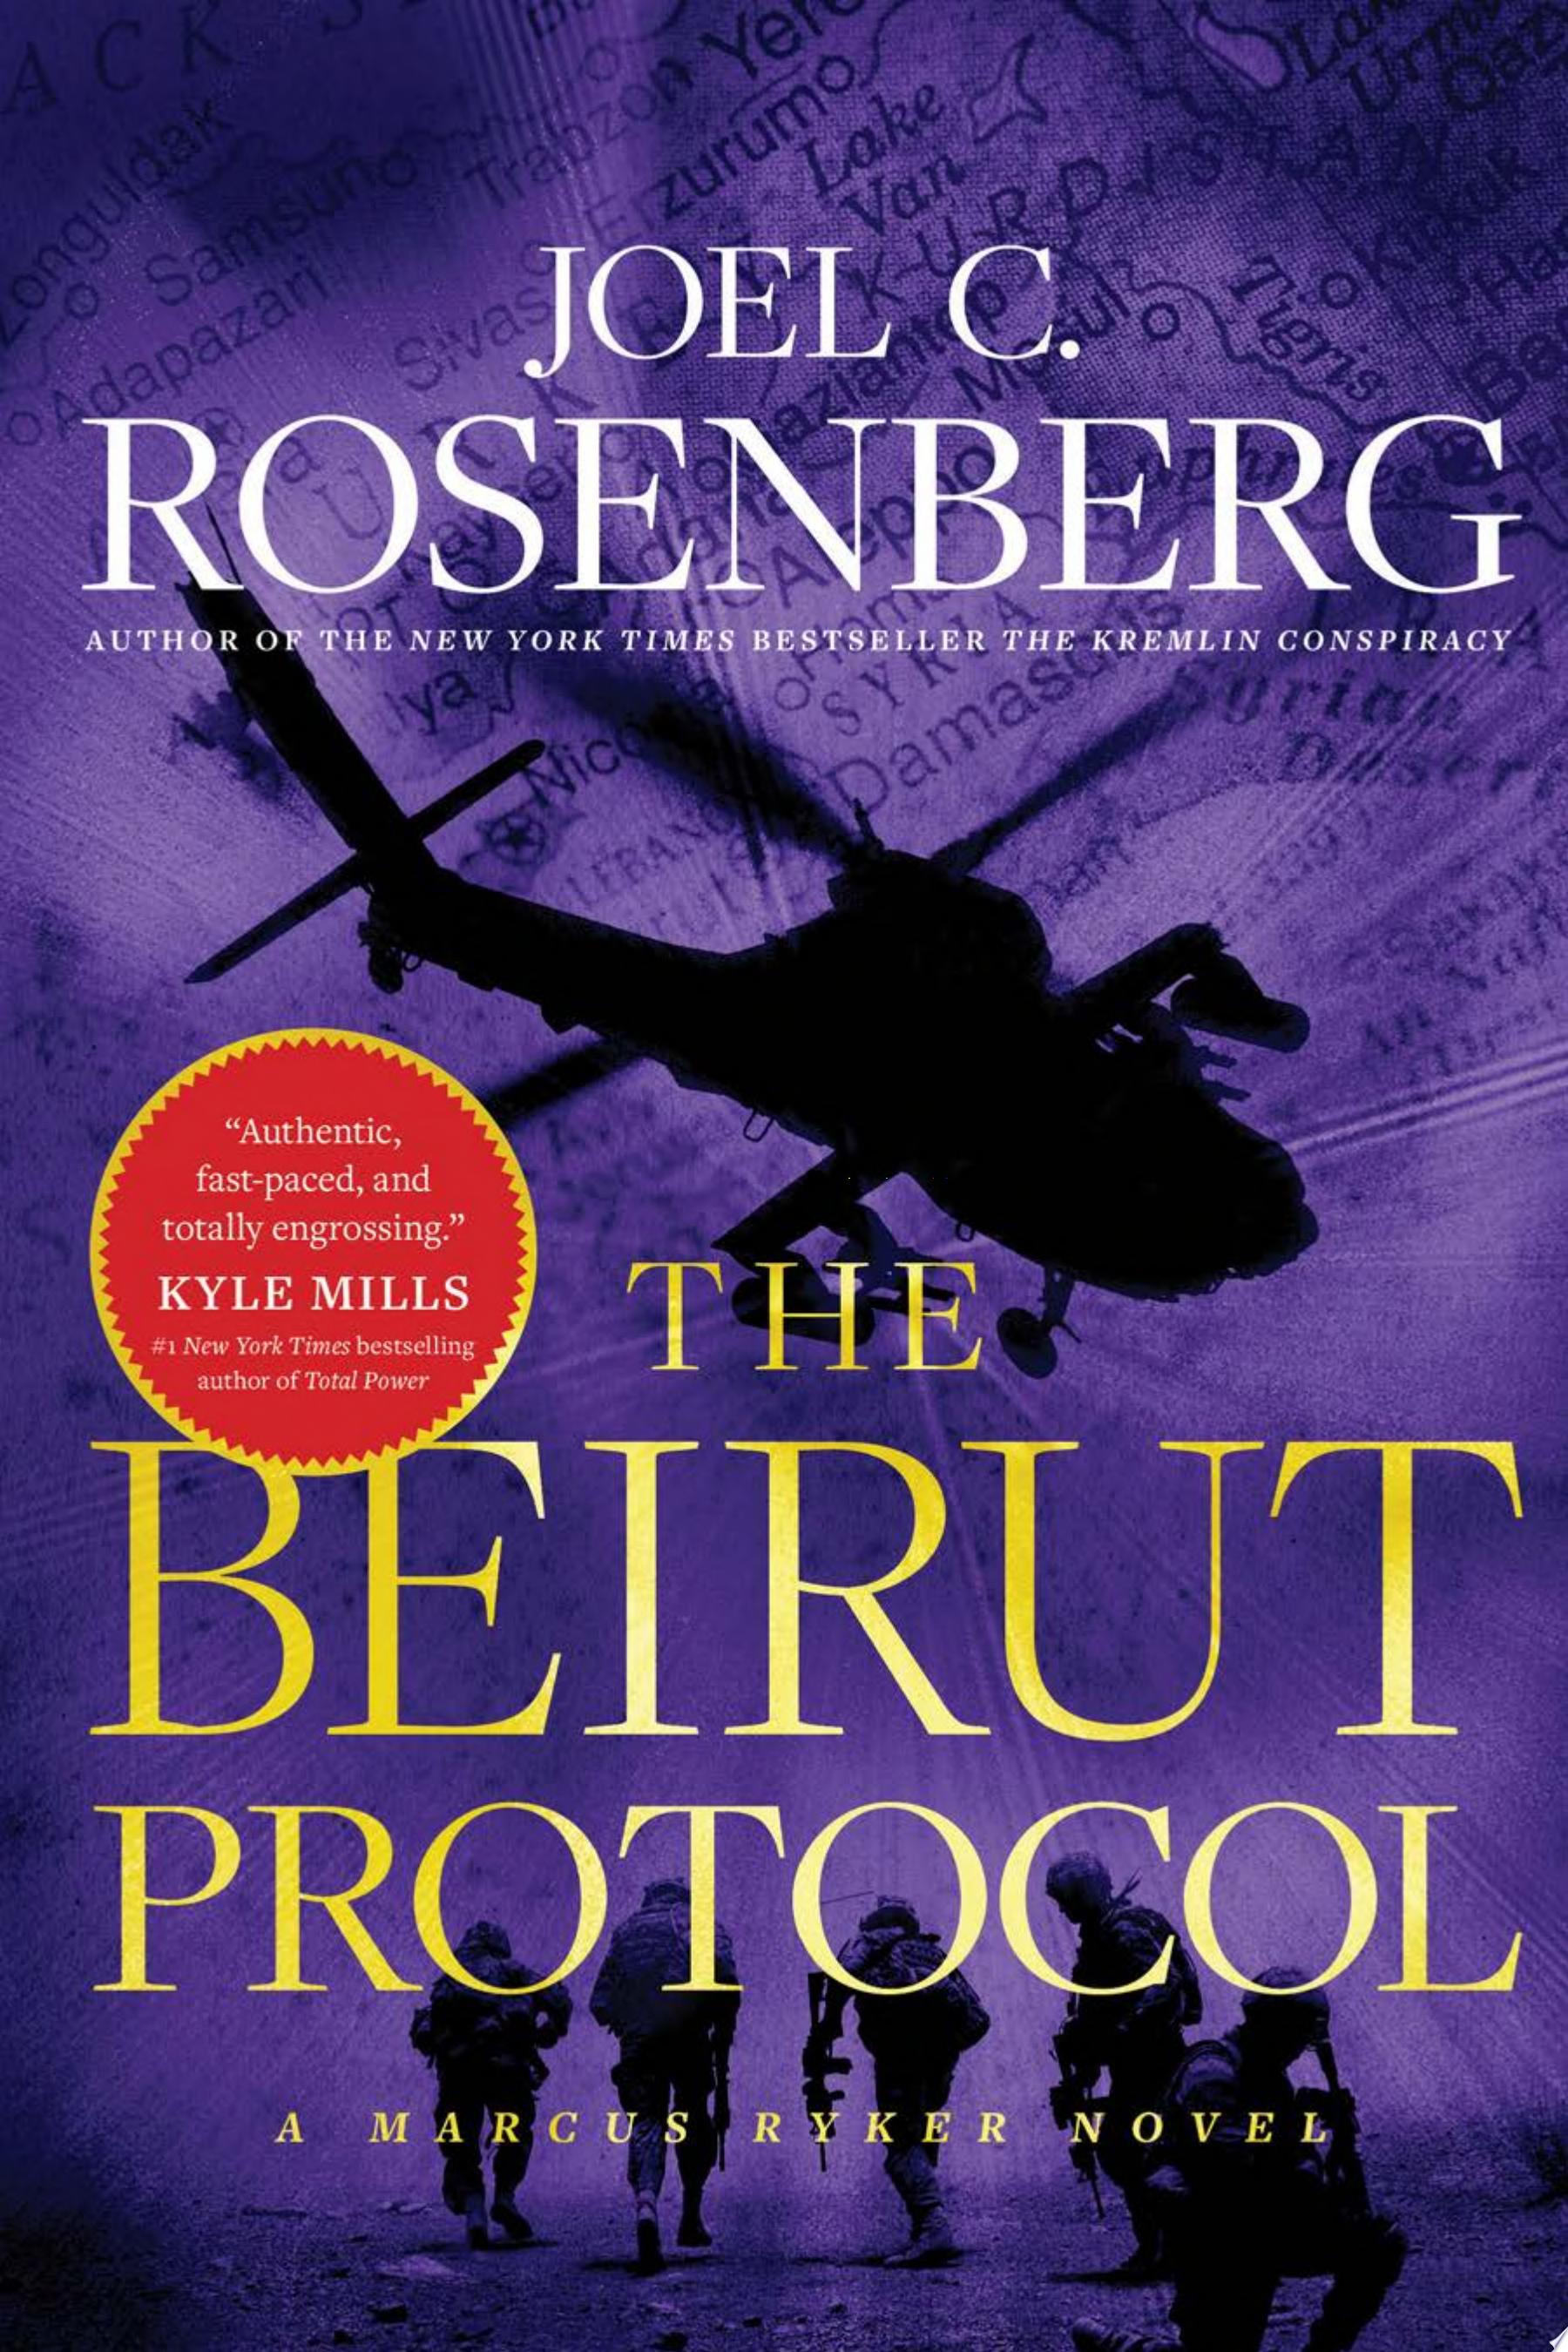 Image for "The Beirut Protocol"